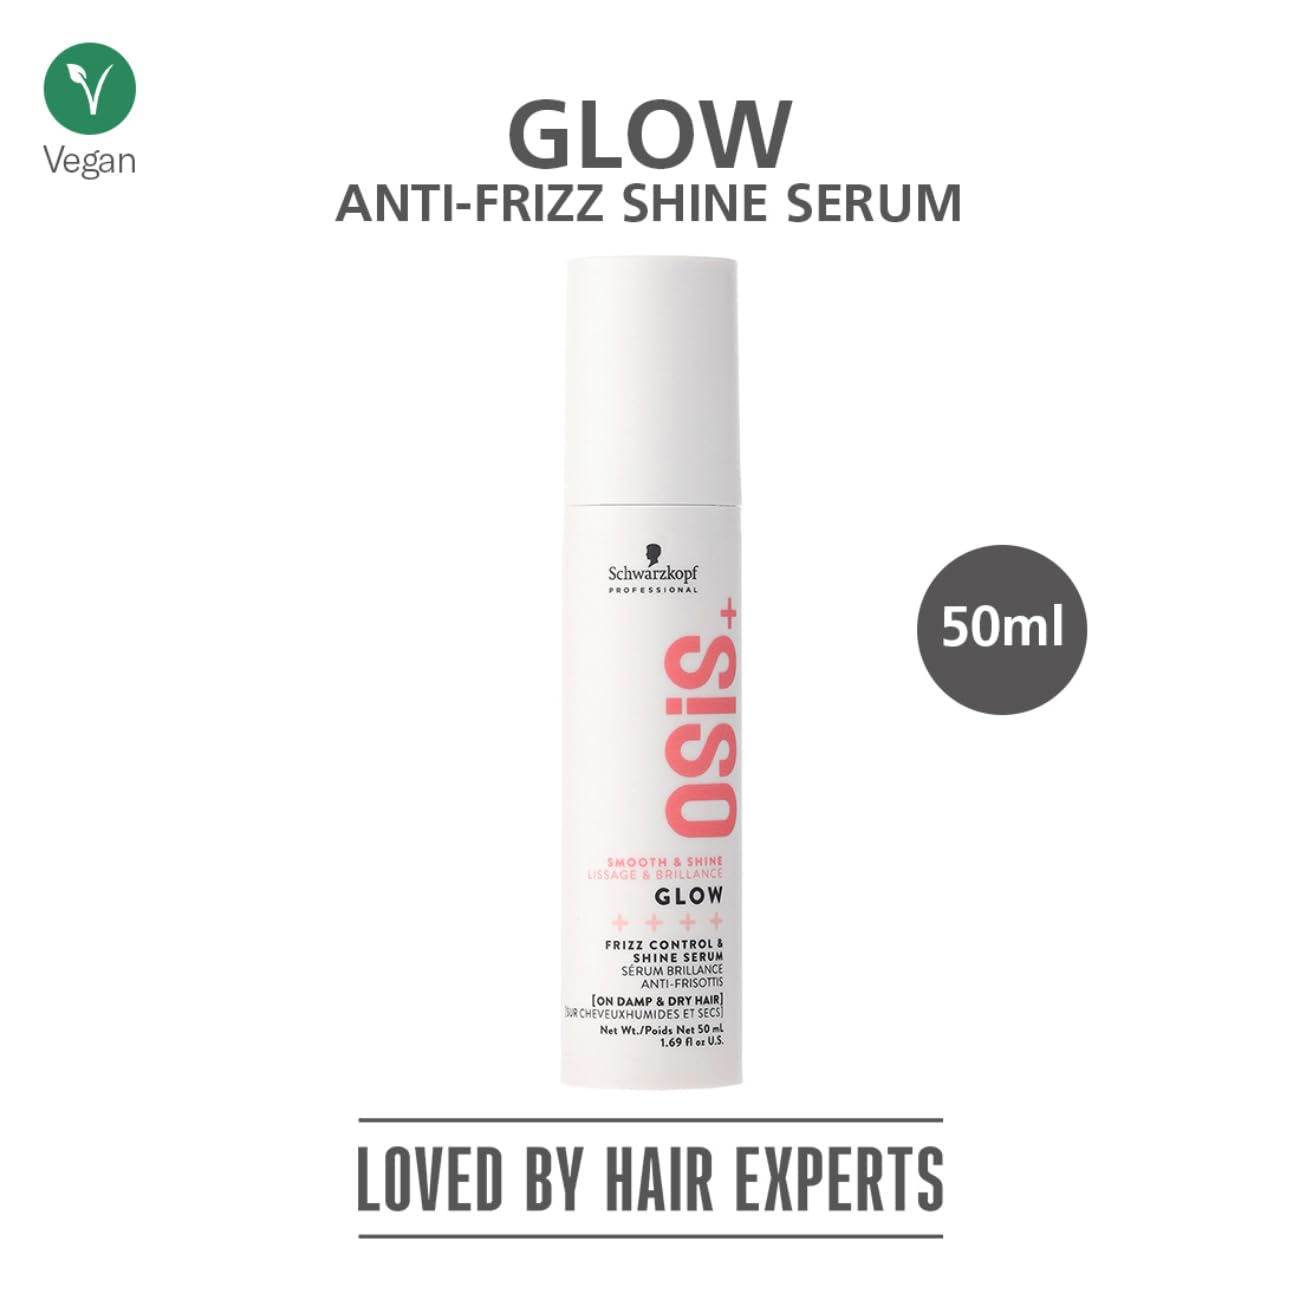 A hair serum that helps calm frizz and style your hair with shine.